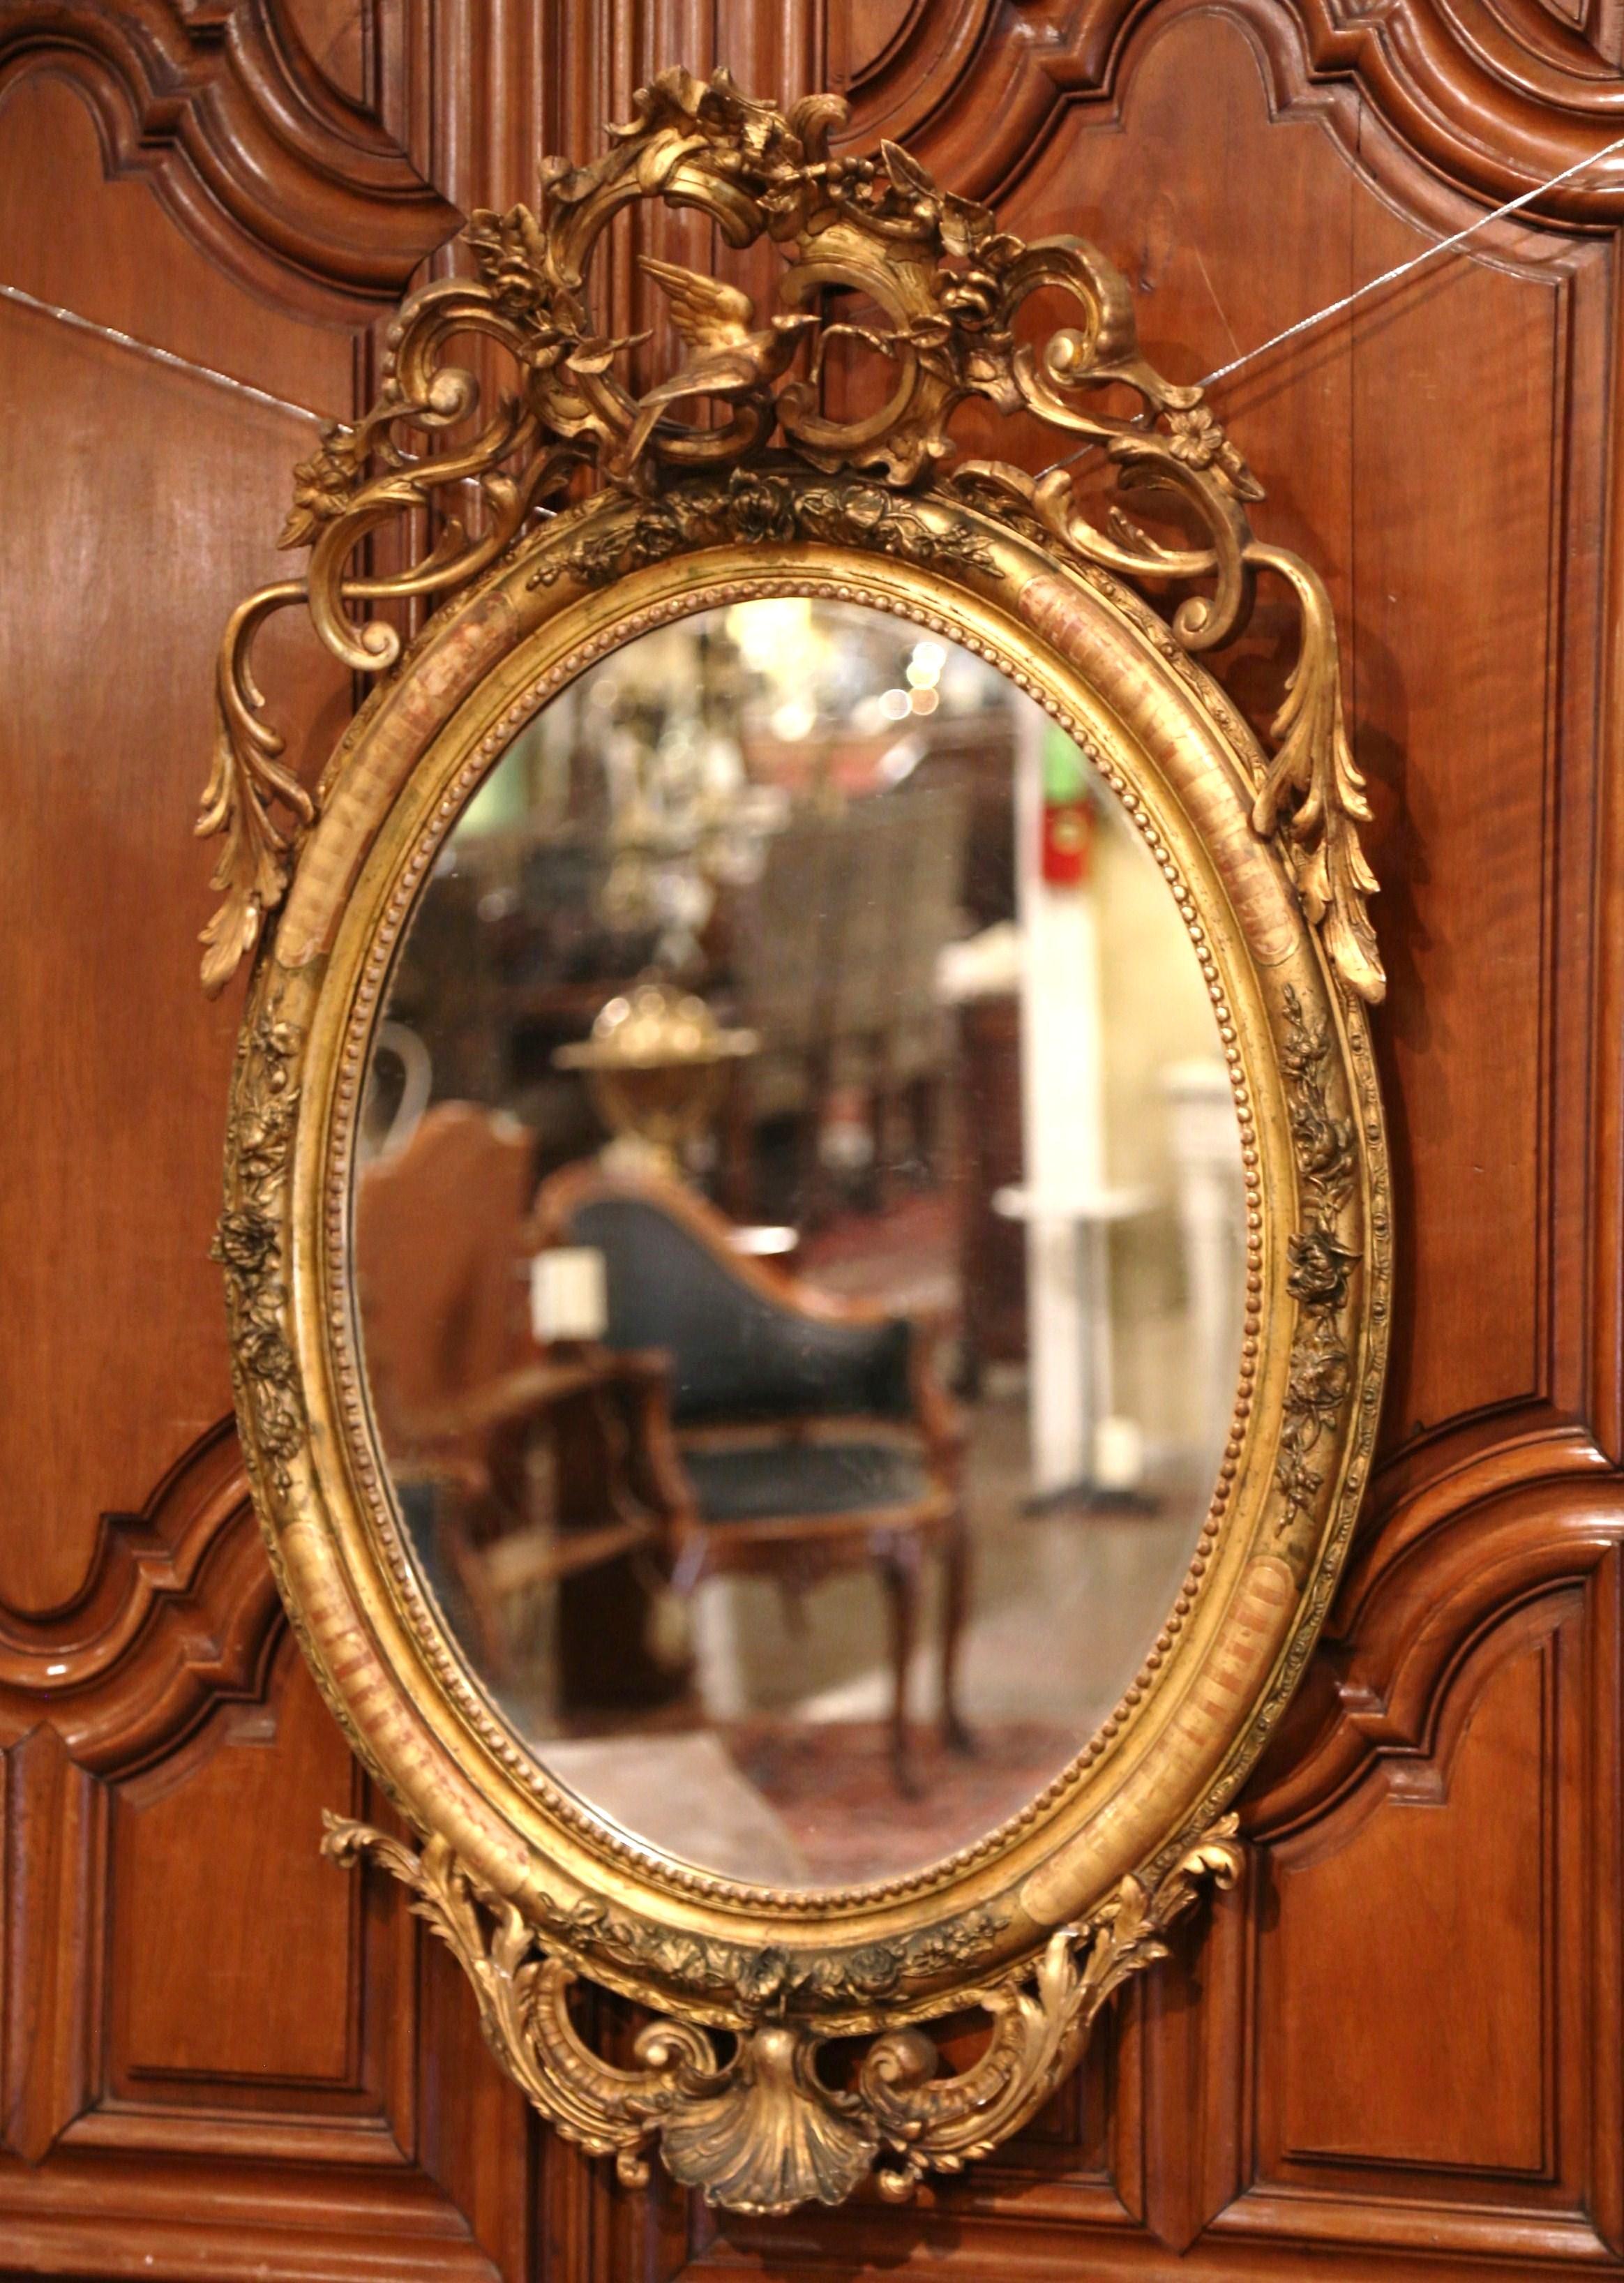 Decorate a powder room or entryway with this elegant antique wall mirror. Crafted in France, circa 1860, the beaded oval frame is decorated with floral motifs including a carved bird cartouche at the pediment, and embellished with shell and leaf